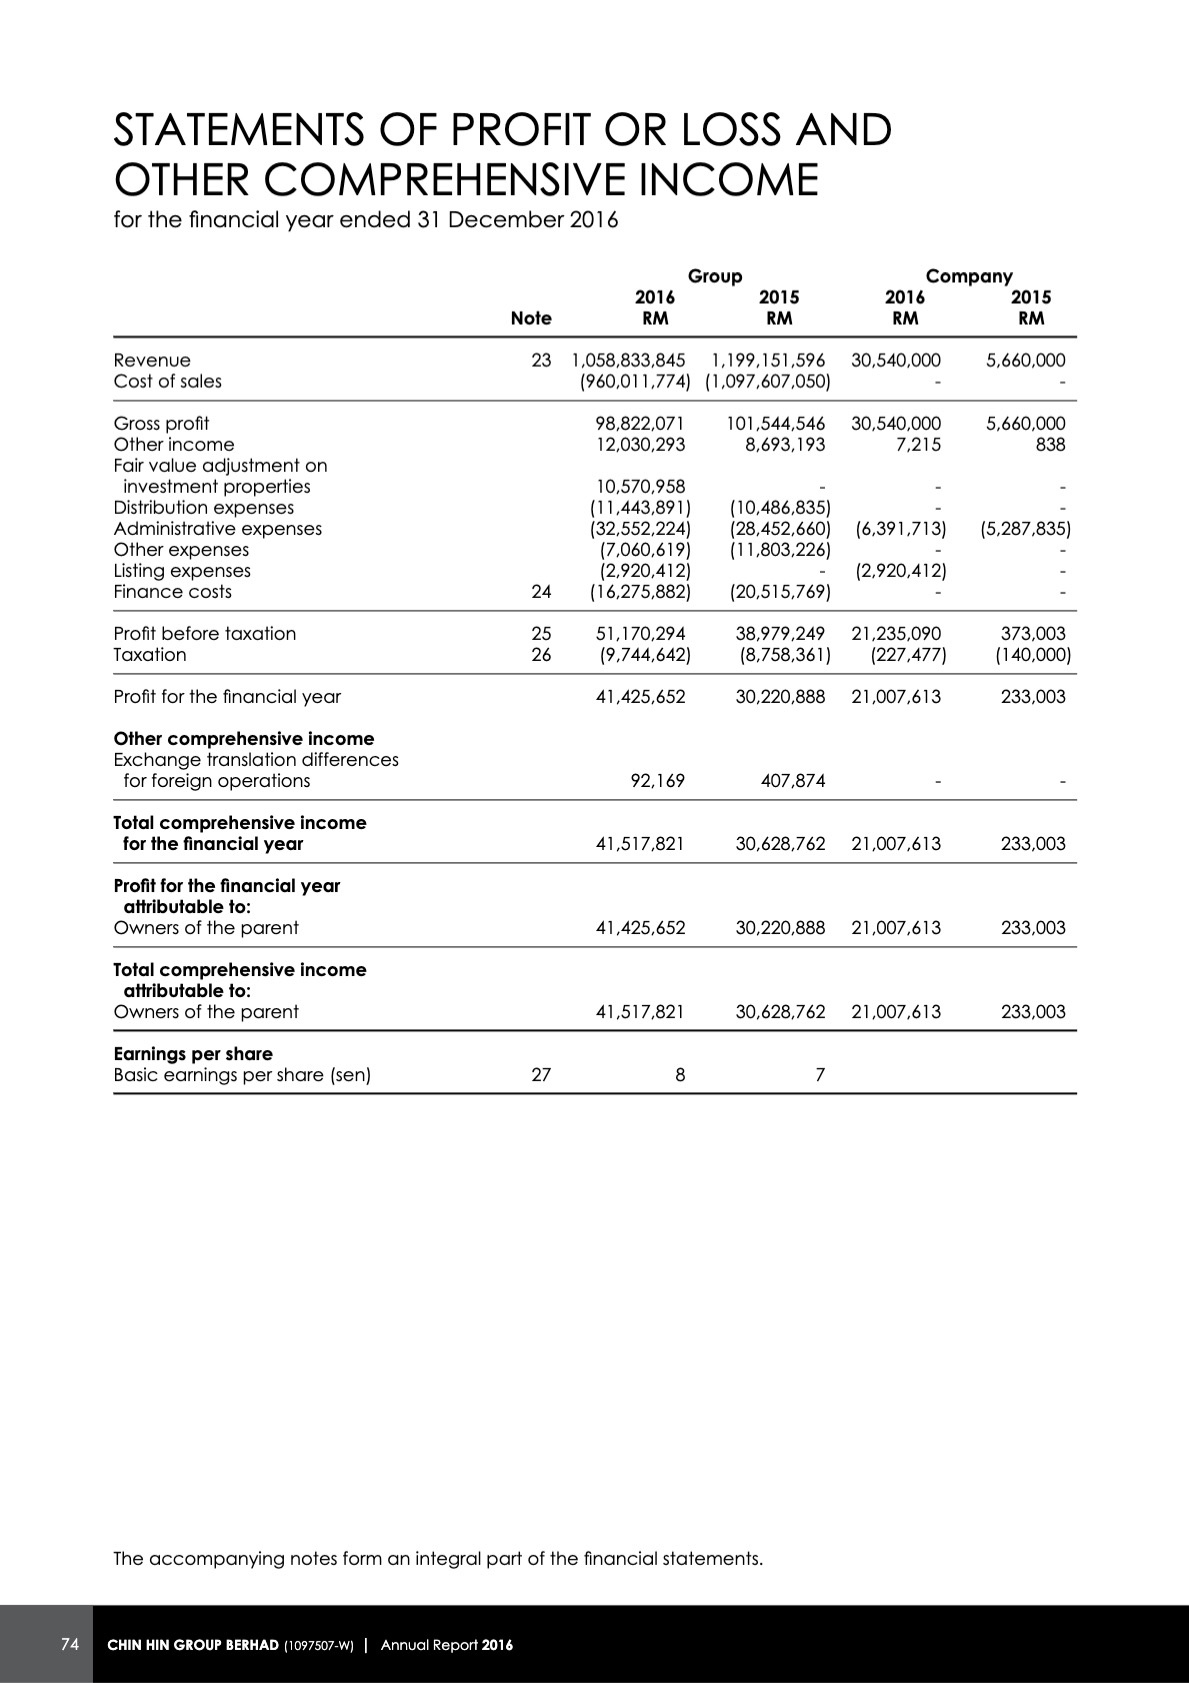 Financial Information Statement Of Comprehensive Income Chin Hin Group Berhad 5234